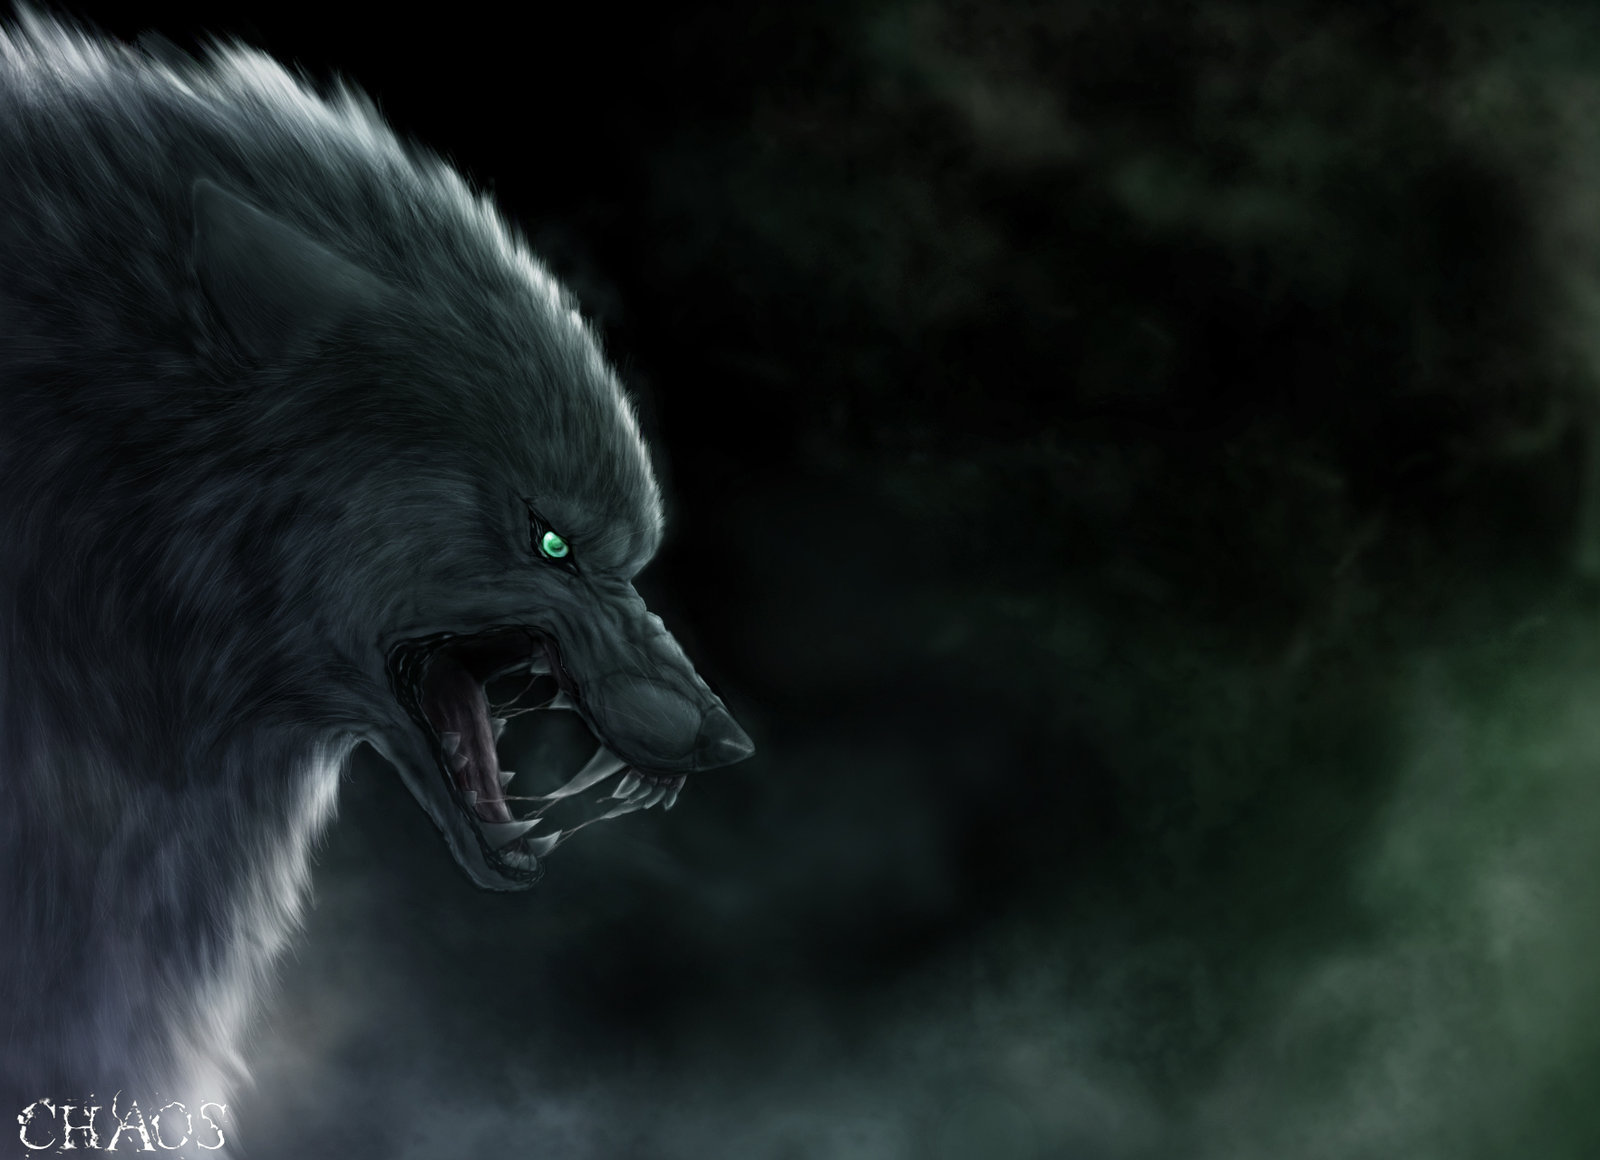 15959 free wallpaper 1080x2400 for phone, download images art, animals, wolfs, black 1080x2400 for mobile